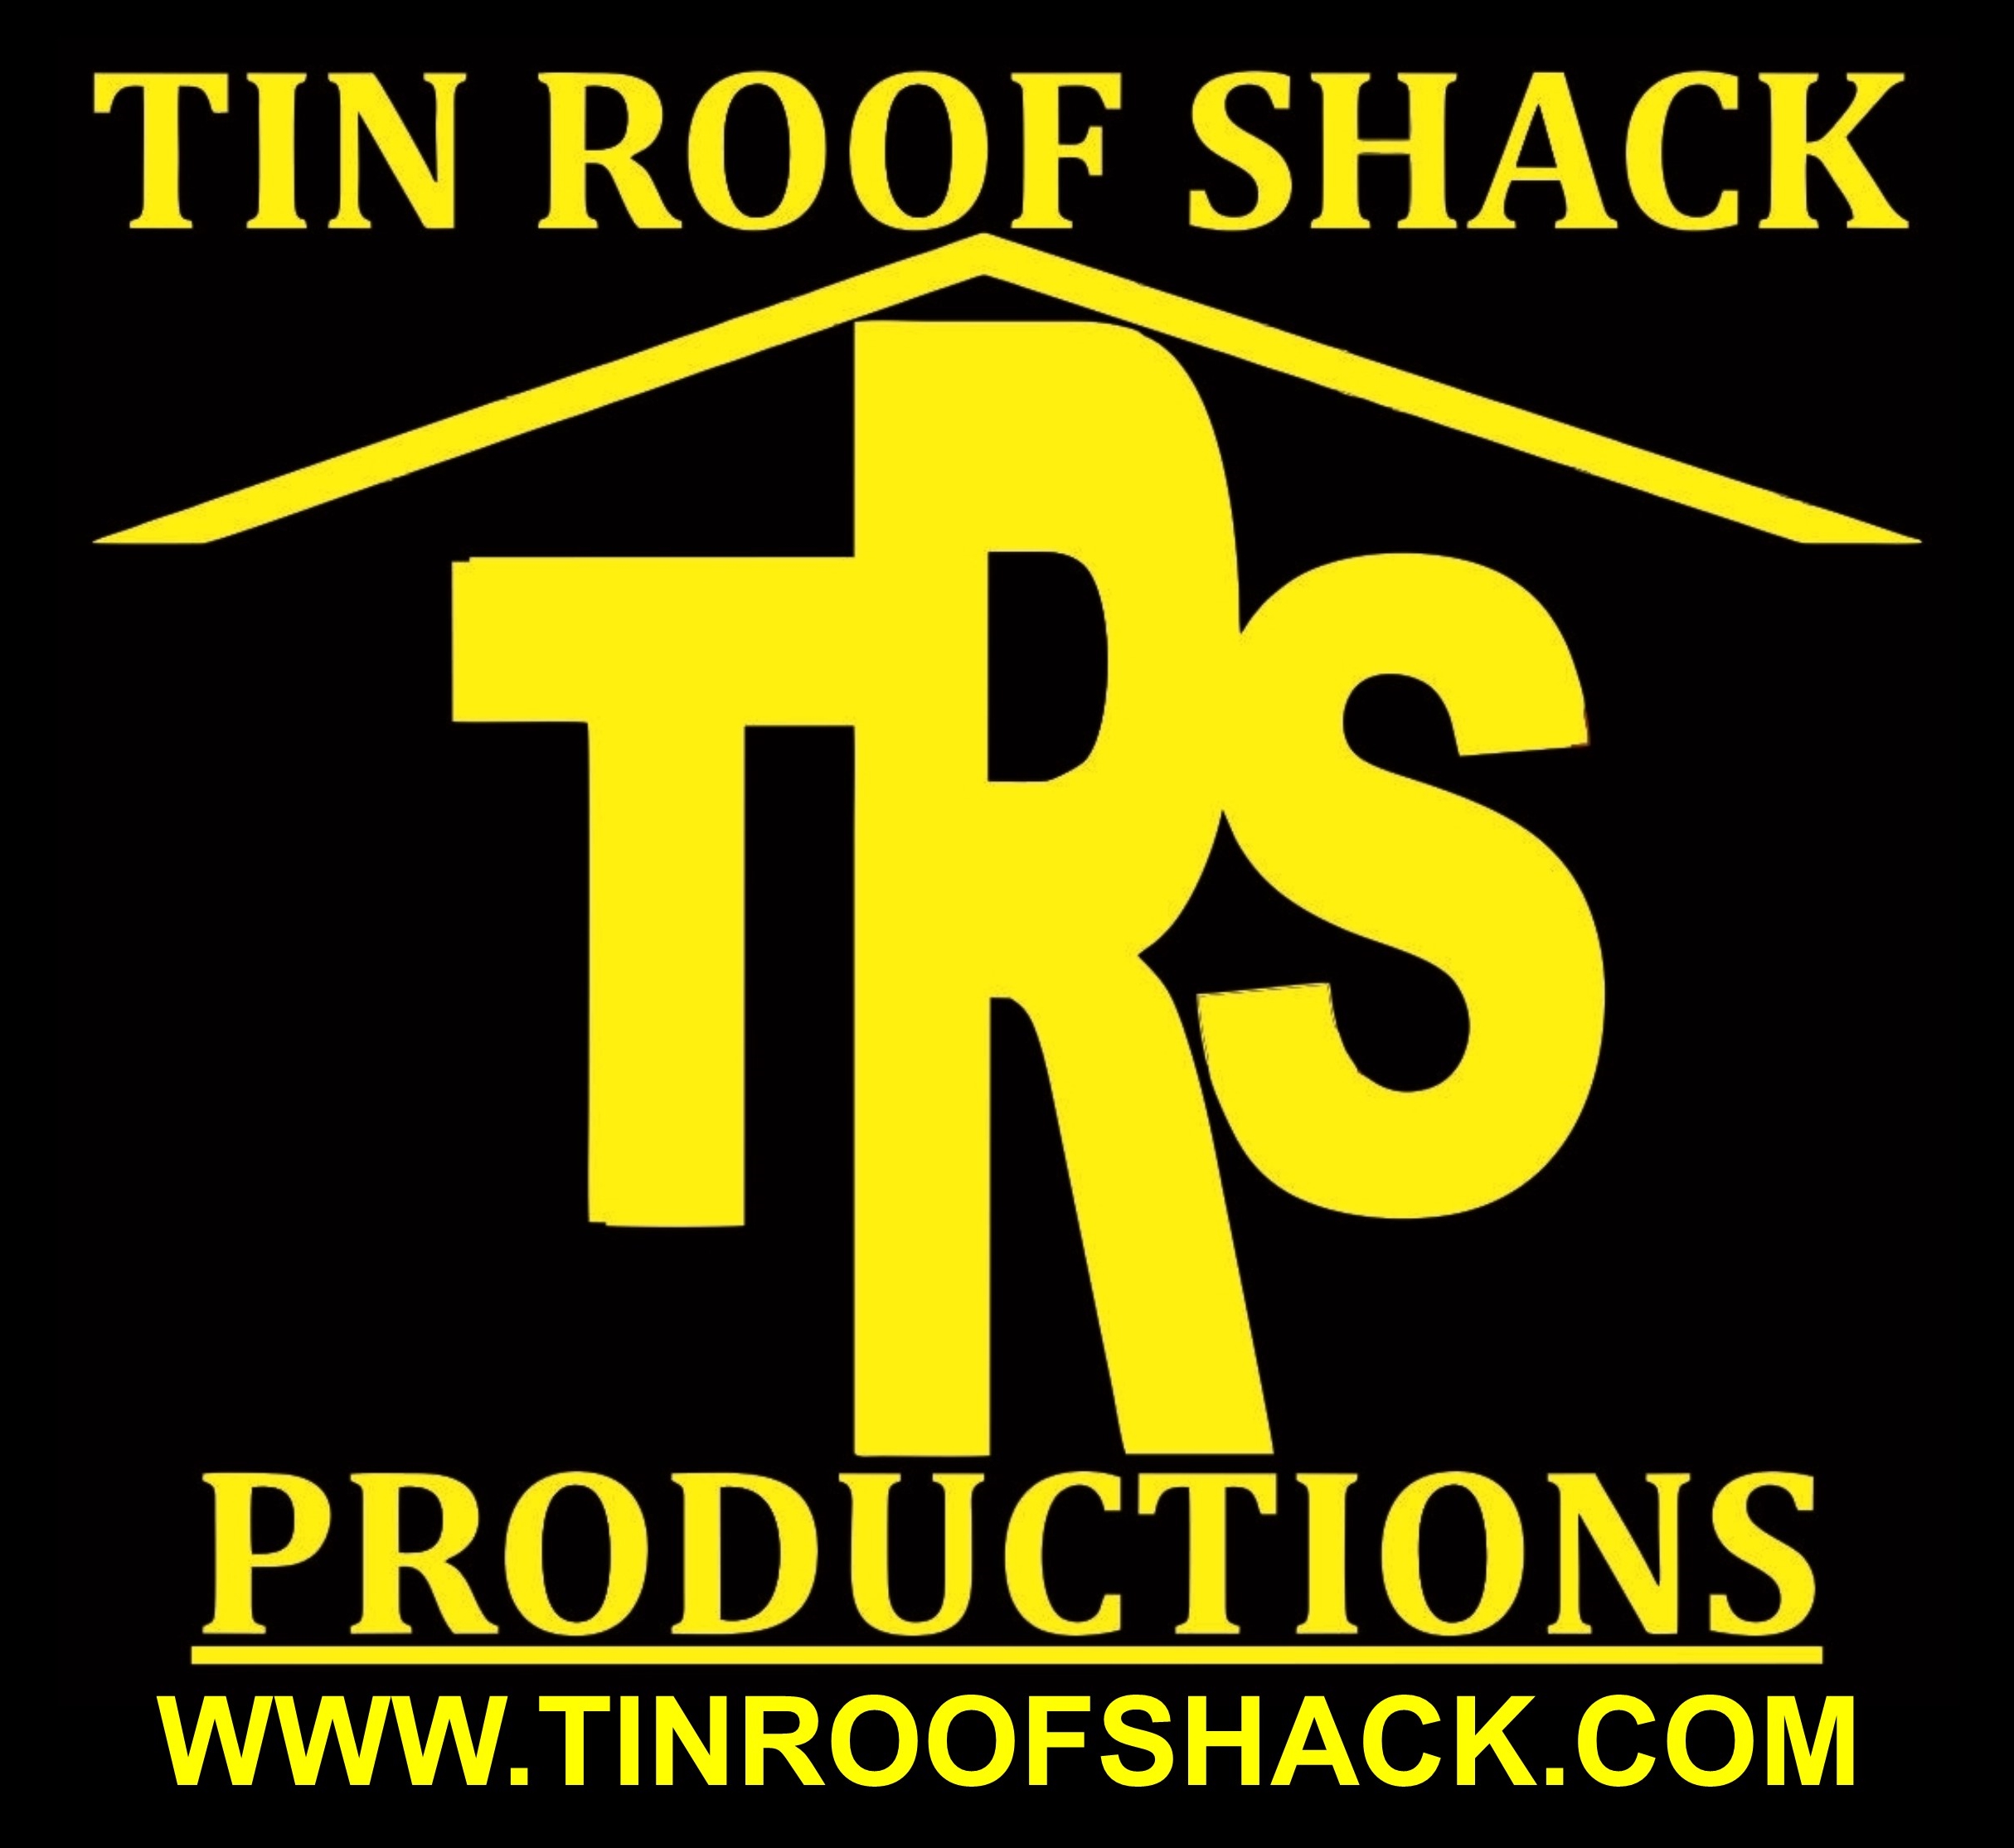 TIN ROOF SHACK PRODUCTIONS